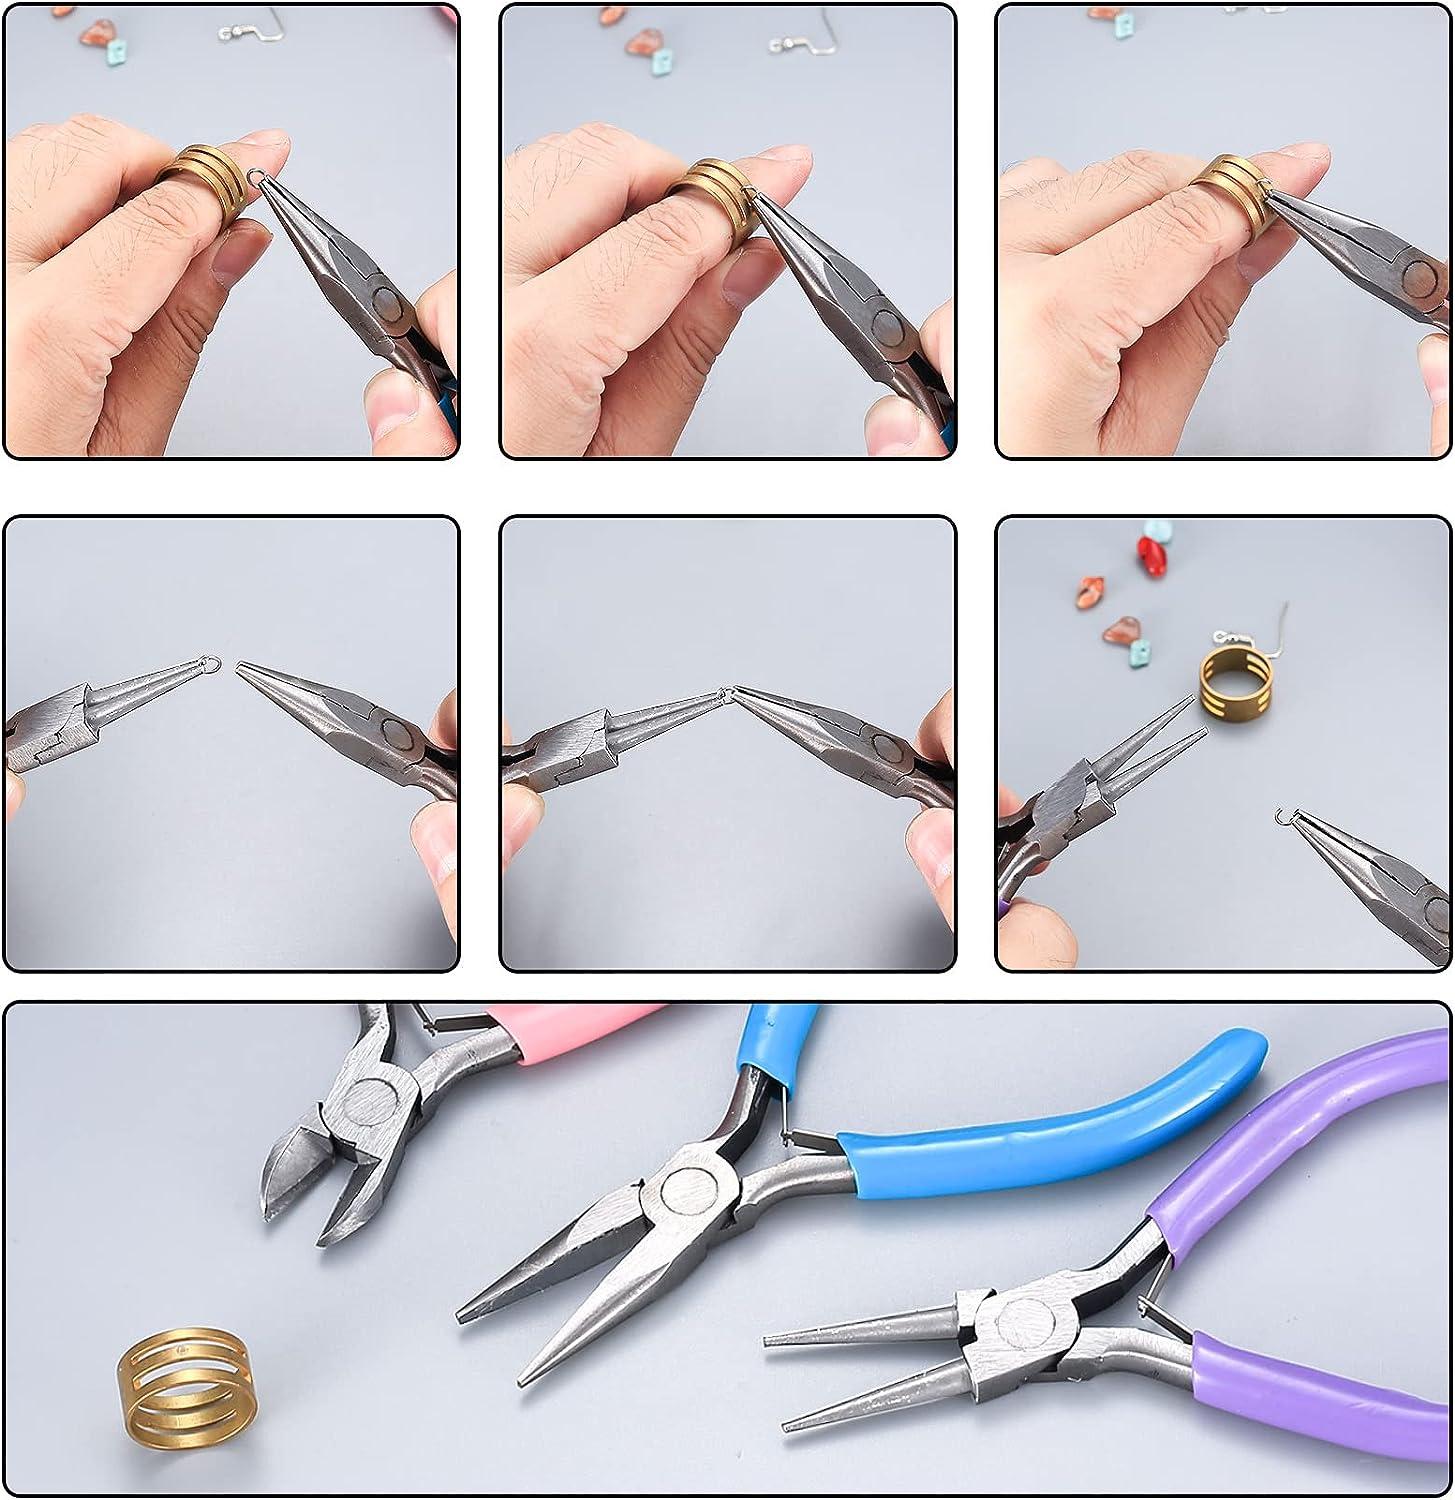 Bead Crimping Pliers Jewelry Making Tools Comfort Grip Handle Craft Cutting  Wire Pliers Bead Crimping Tool